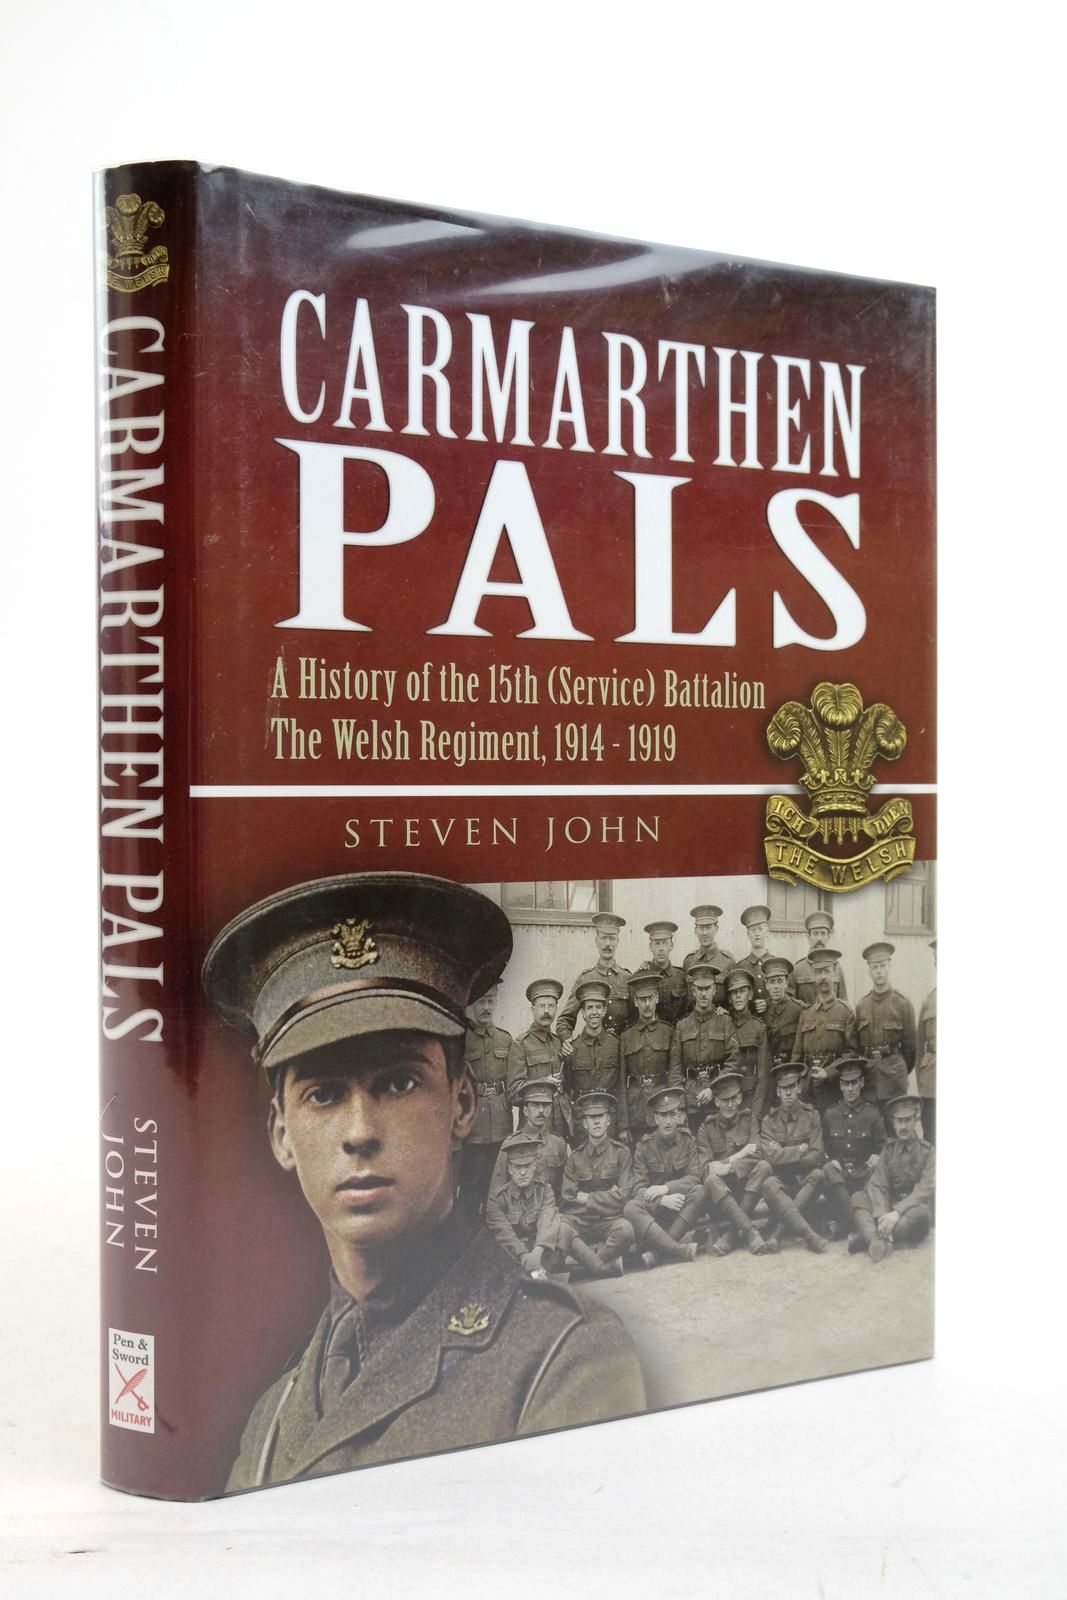 Photo of CARMARTHEN PALS: A HISTORY OF THE 15TH (SERVICE) BATTALION THE WELSH REGIMENT, 1914 - 1919 written by John, Steven published by Pen &amp; Sword Military (STOCK CODE: 2138336)  for sale by Stella & Rose's Books